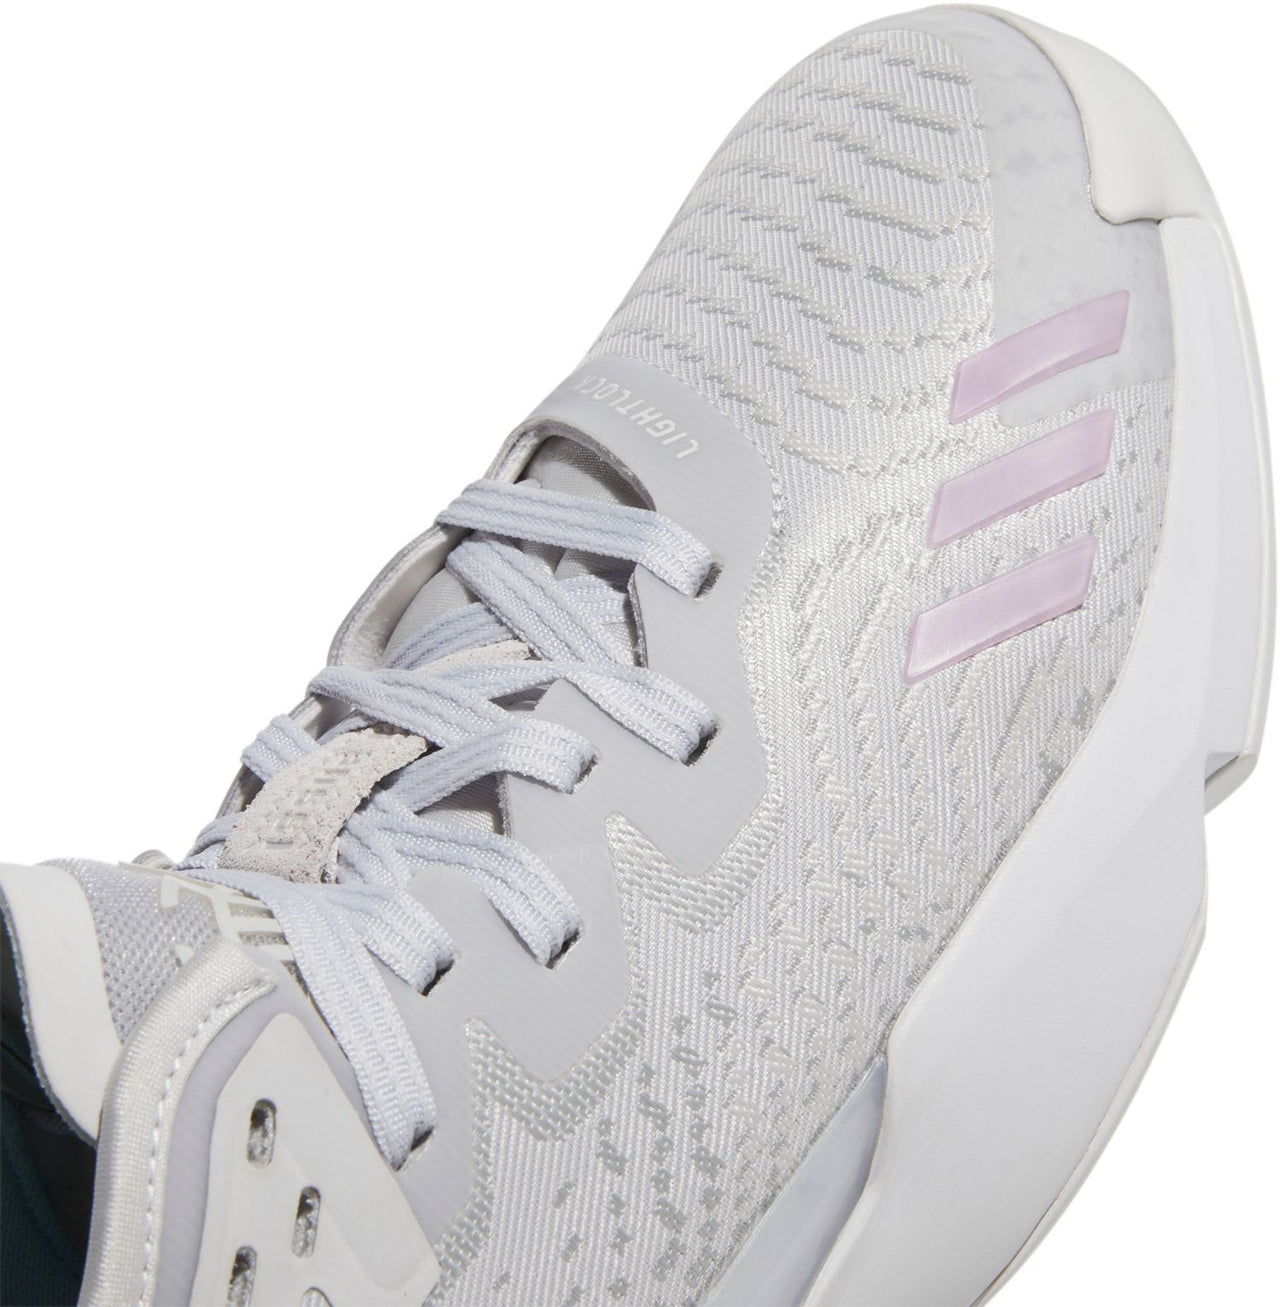 Adidas D.O.N. Issue #4 Basketball Shoes